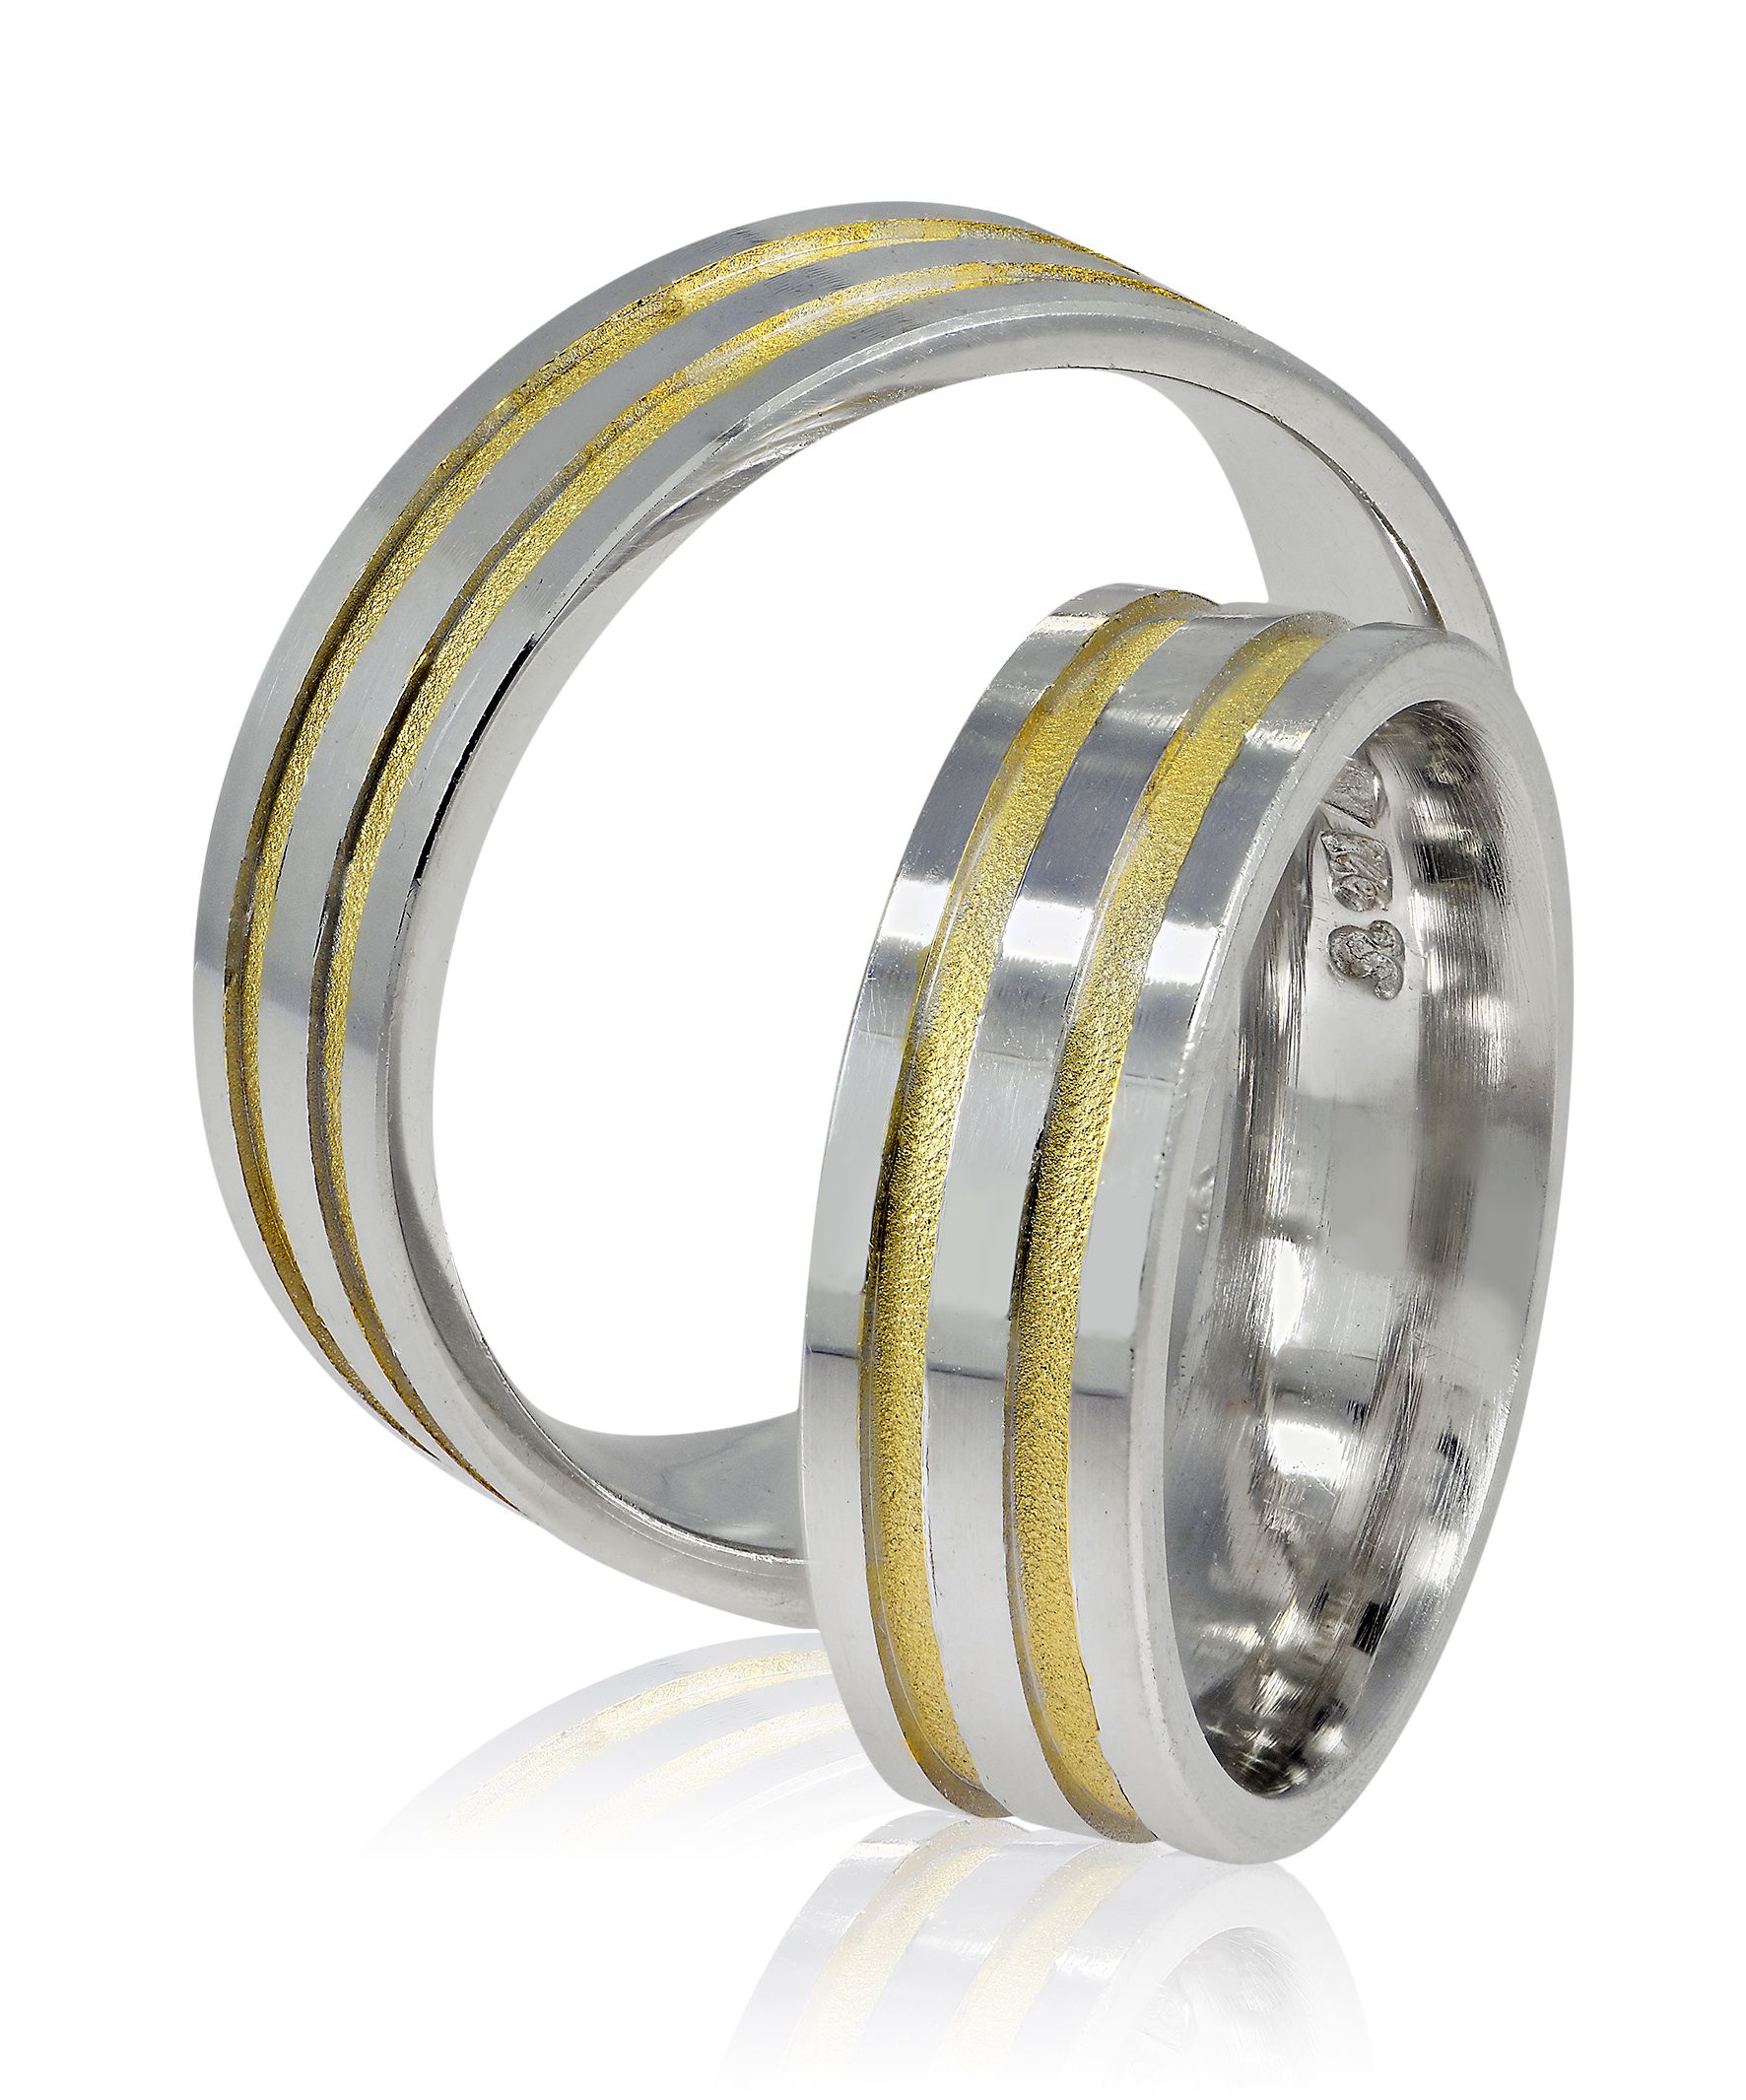 White gold & yellow gold wedding rings 6mm (code SS11a)